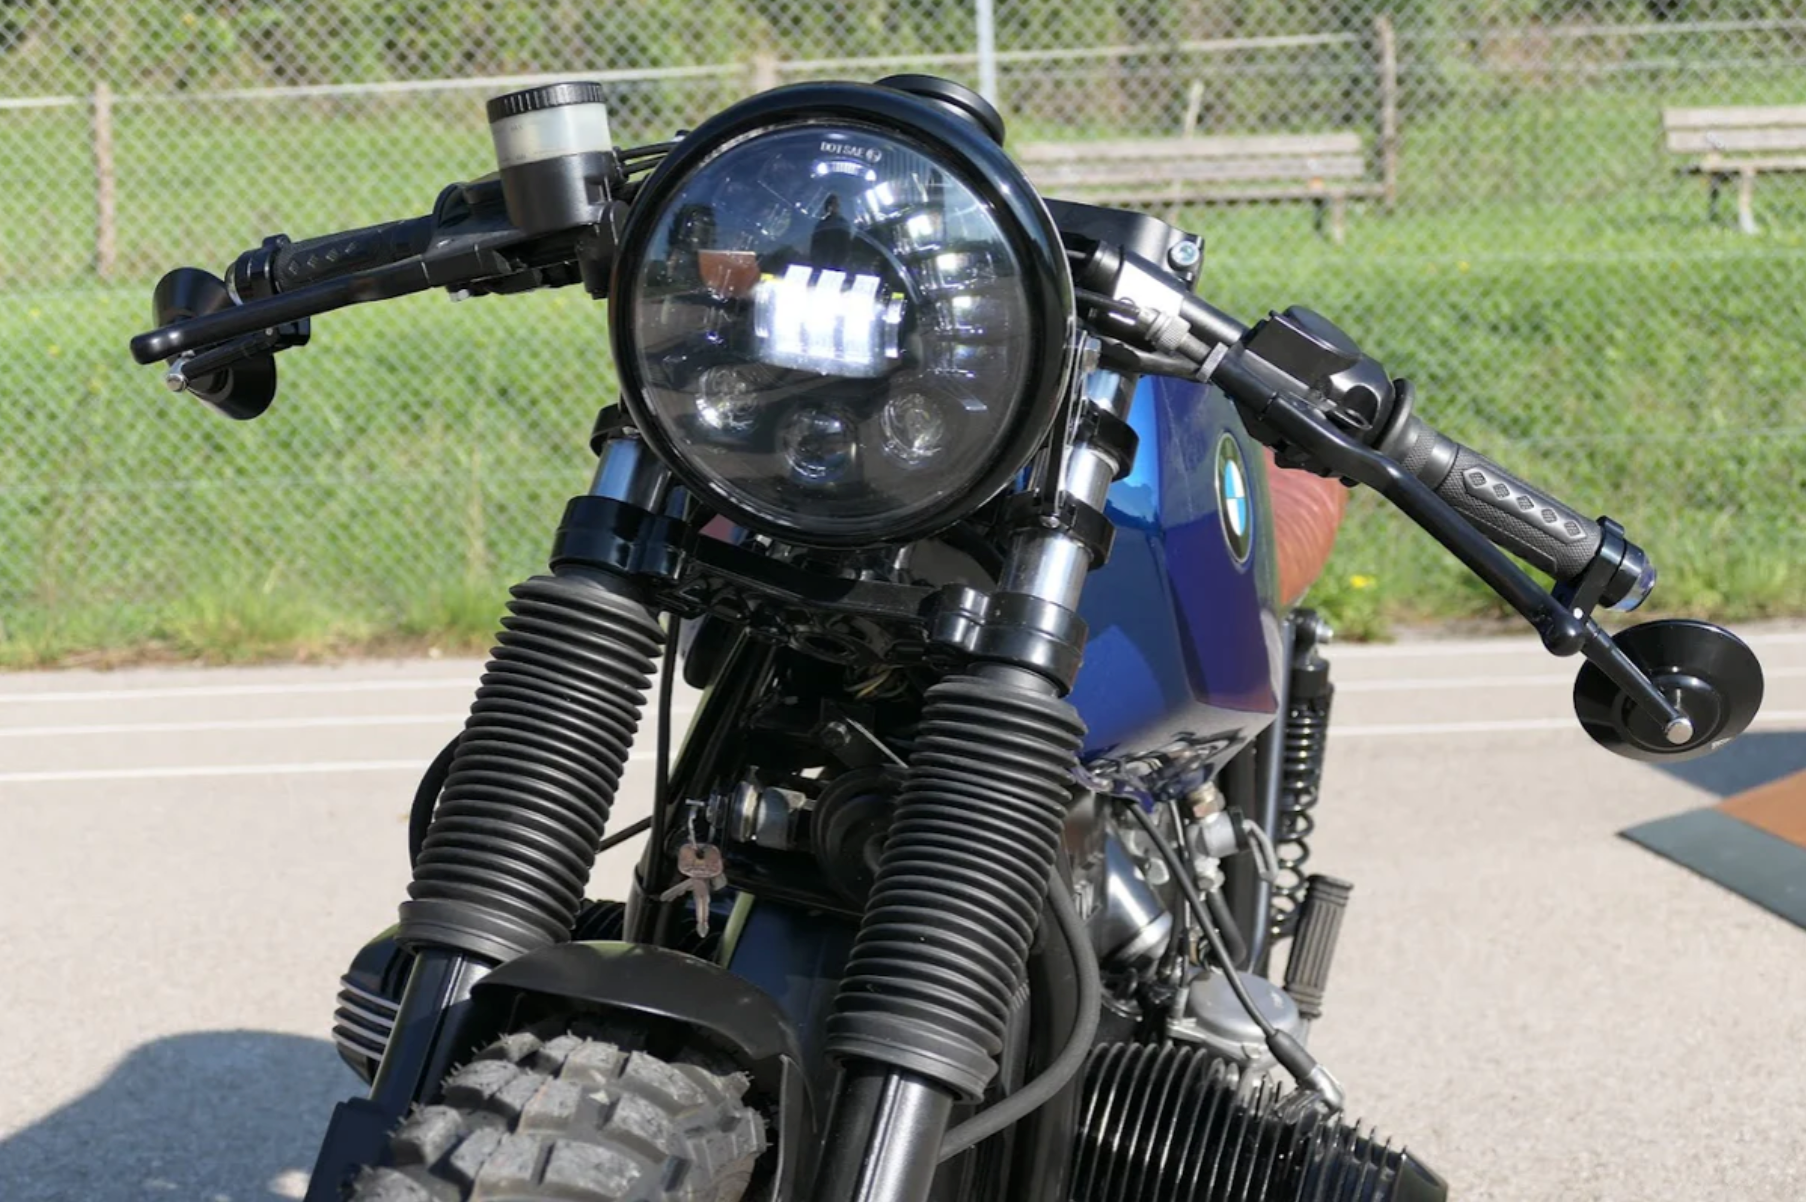 How to choose a motorcycle headlight?